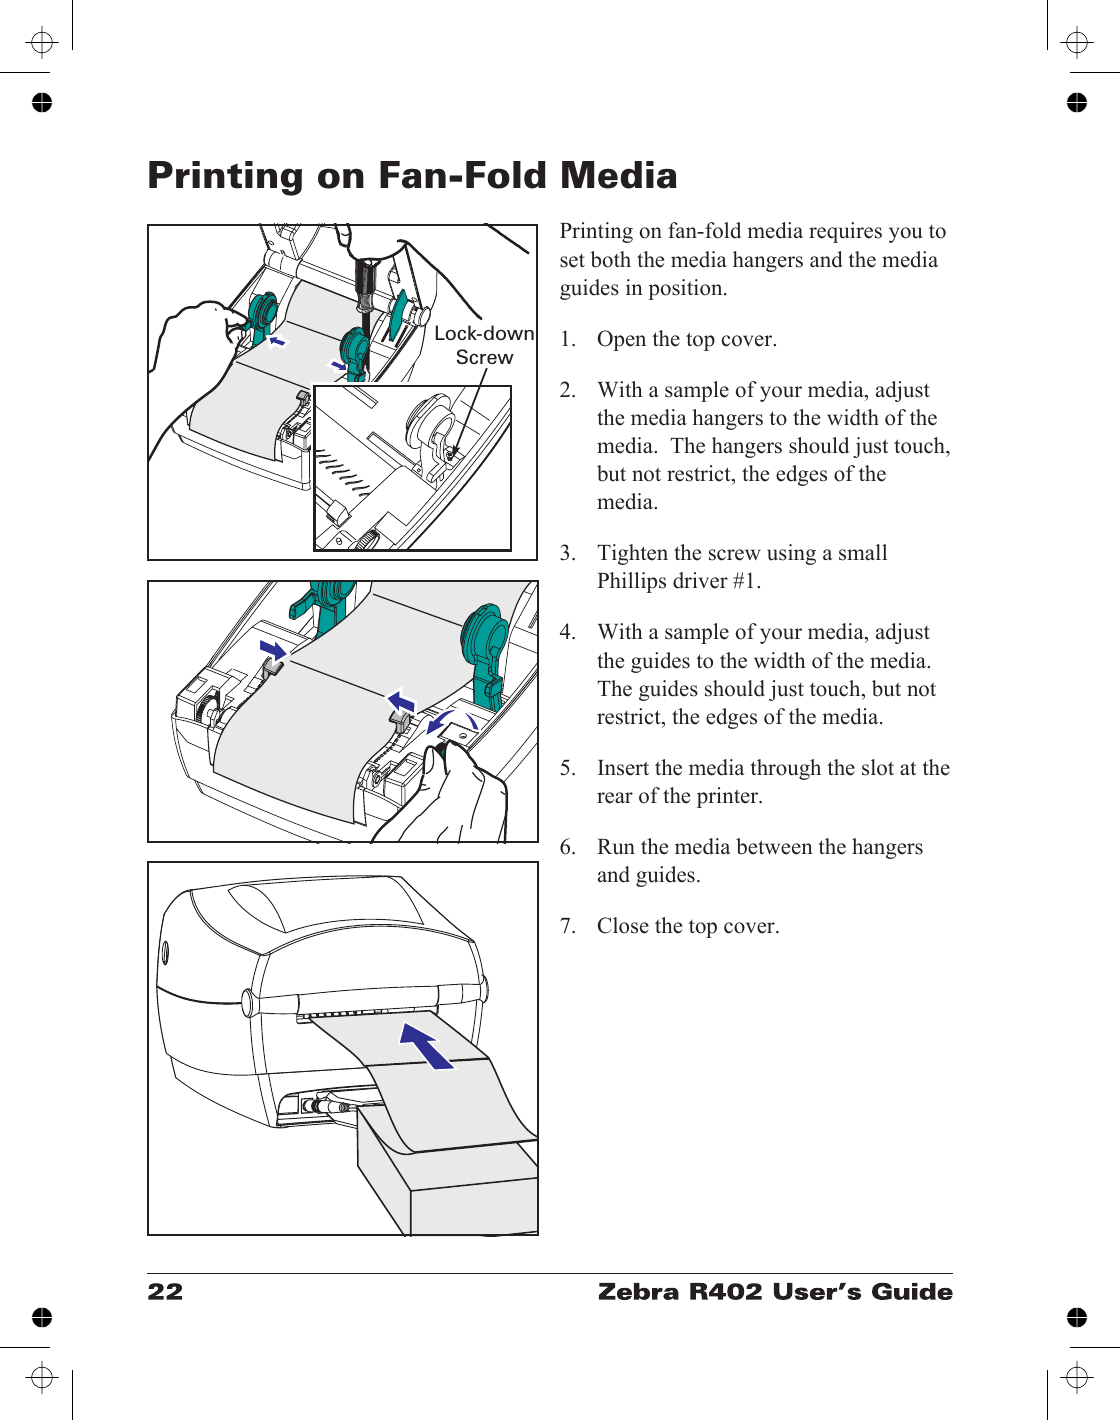 Printing on Fan-Fold MediaPrinting on fan-fold media requires you toset both the media hangers and the mediaguides in position.1. Open the top cover.2. With a sample of your media, adjustthe media hangers to the width of themedia.  The hangers should just touch,but not restrict, the edges of themedia.3. Tighten the screw using a smallPhillips driver #1.4. With a sample of your media, adjustthe guides to the width of the media.The guides should just touch, but notrestrict, the edges of the media.5. Insert the media through the slot at therear of the printer.6. Run the media between the hangersand guides.7. Close the top cover.Lock-downScrew